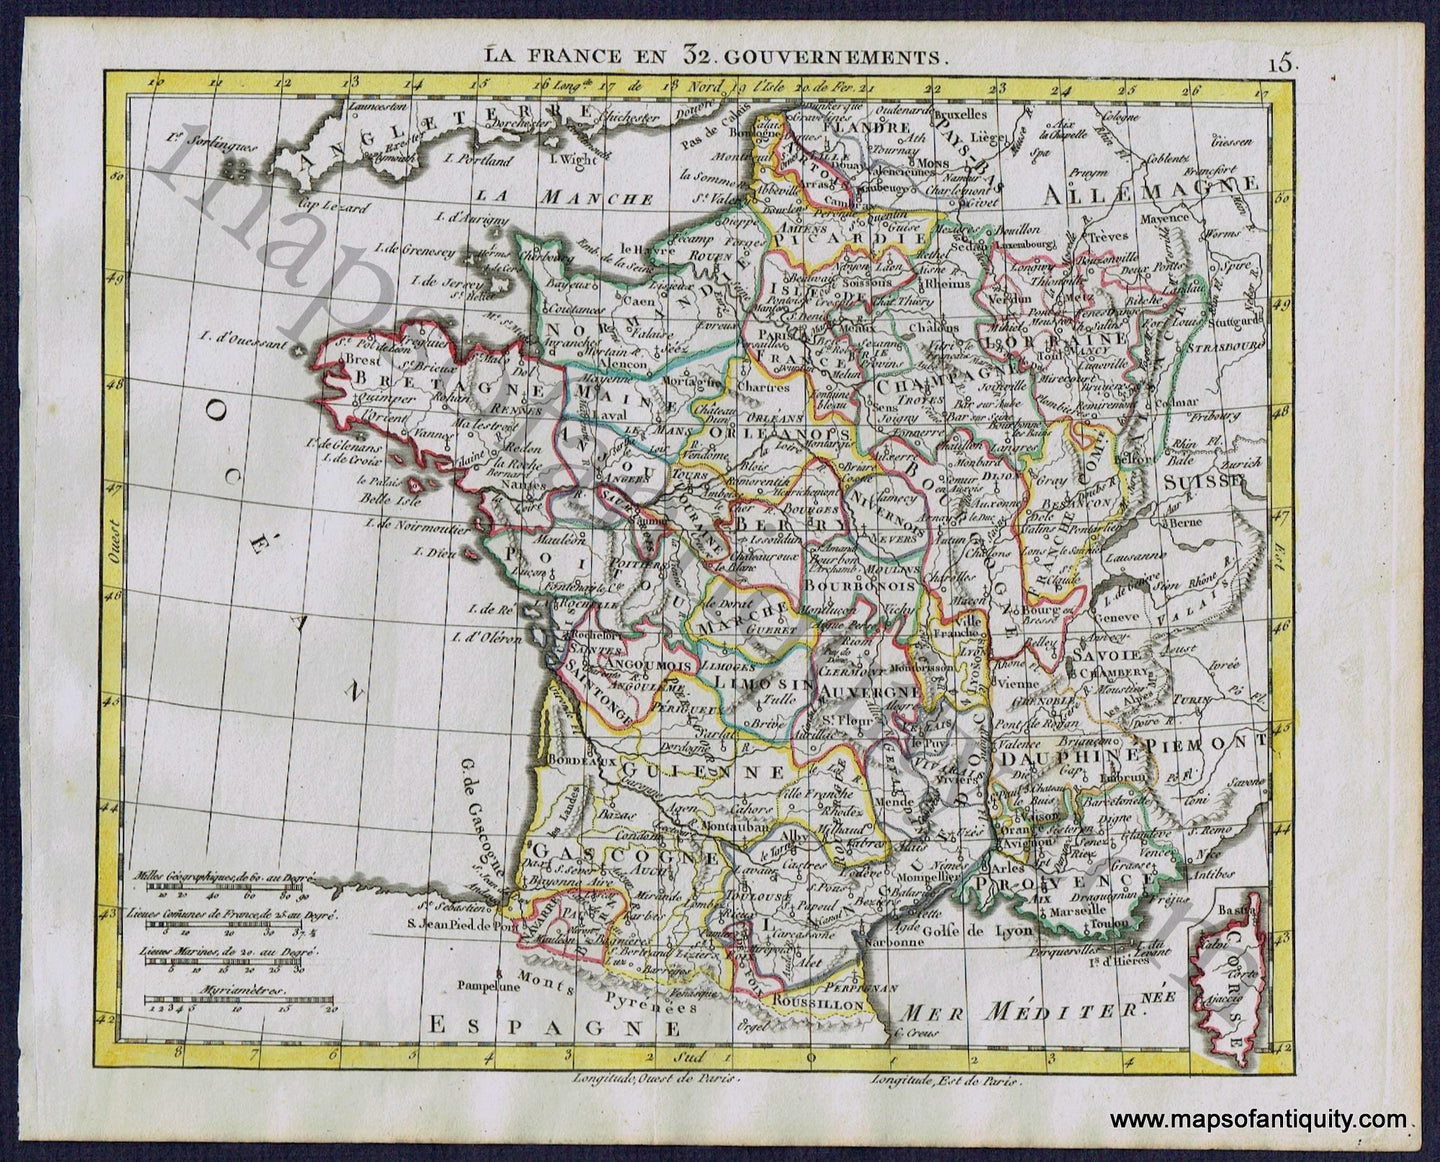 Antique-Map-La-France-en-32-Gouvernements-Government-Herrison-French-1806-1800s-Early-19th-Century-Maps-of-Antiquity